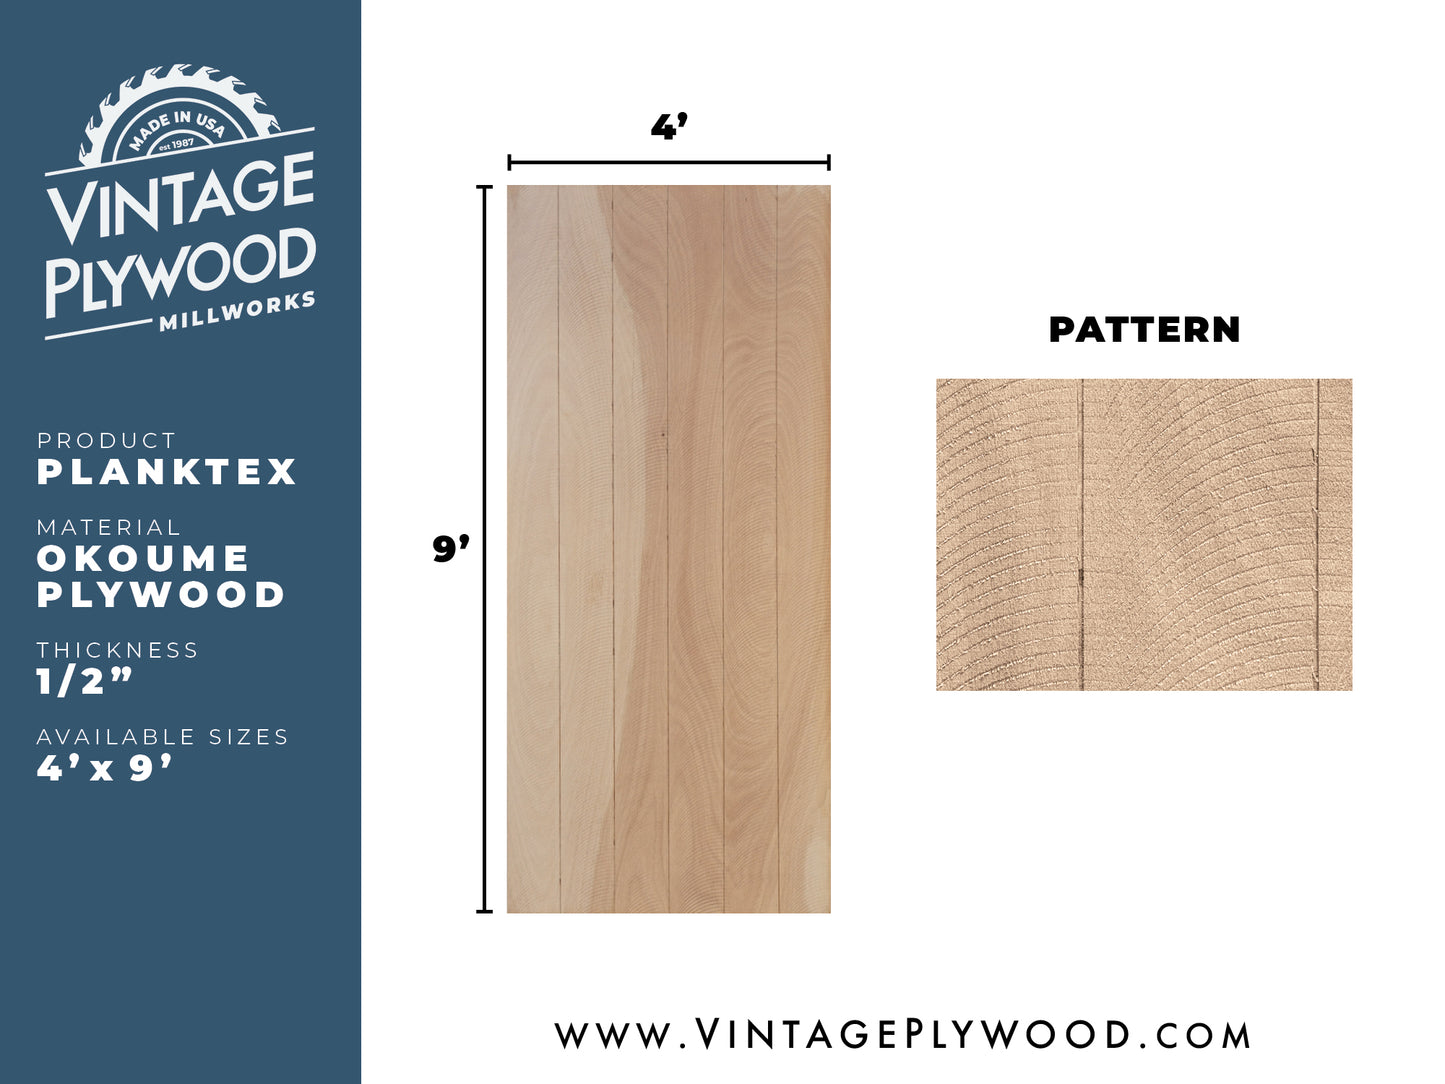 Planktex plywood pattern consisting of a rough saw, swirl appearance separated by 3/16” grooves, 8” on center, used on Eichler & Streng homes